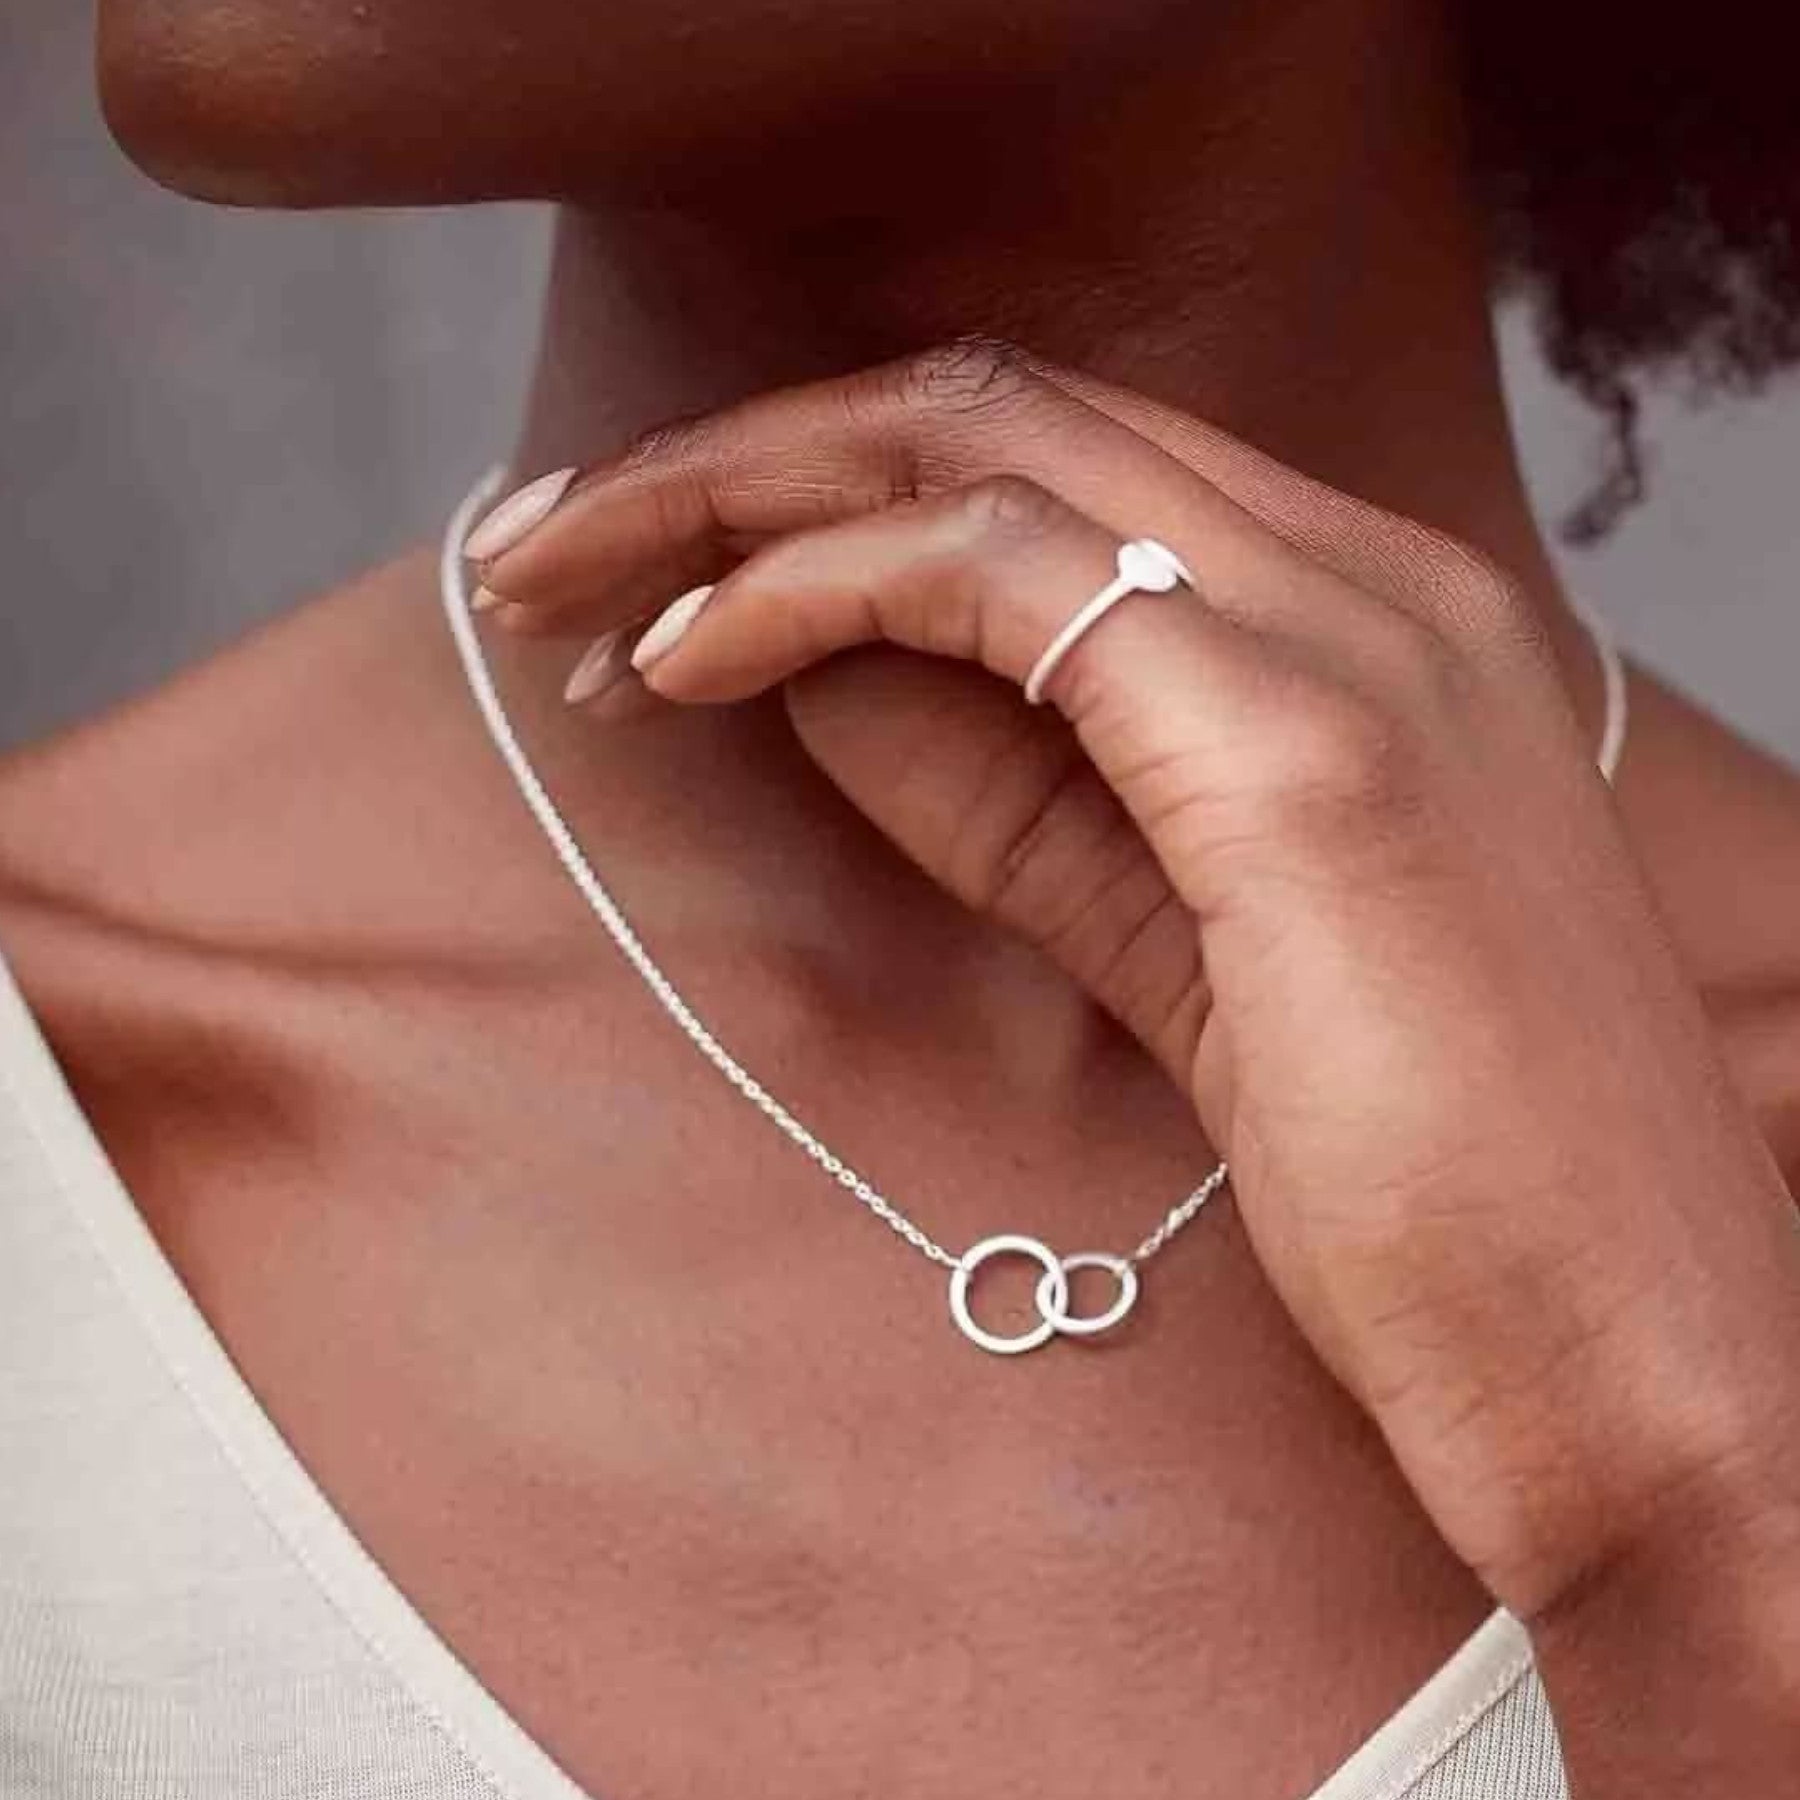 Woman displaying silver necklace with interlocking circles pendant, elegant minimalist jewelry, subtle tan dress, manicured fingernails, fashion accessories, close-up of neck and chest area.